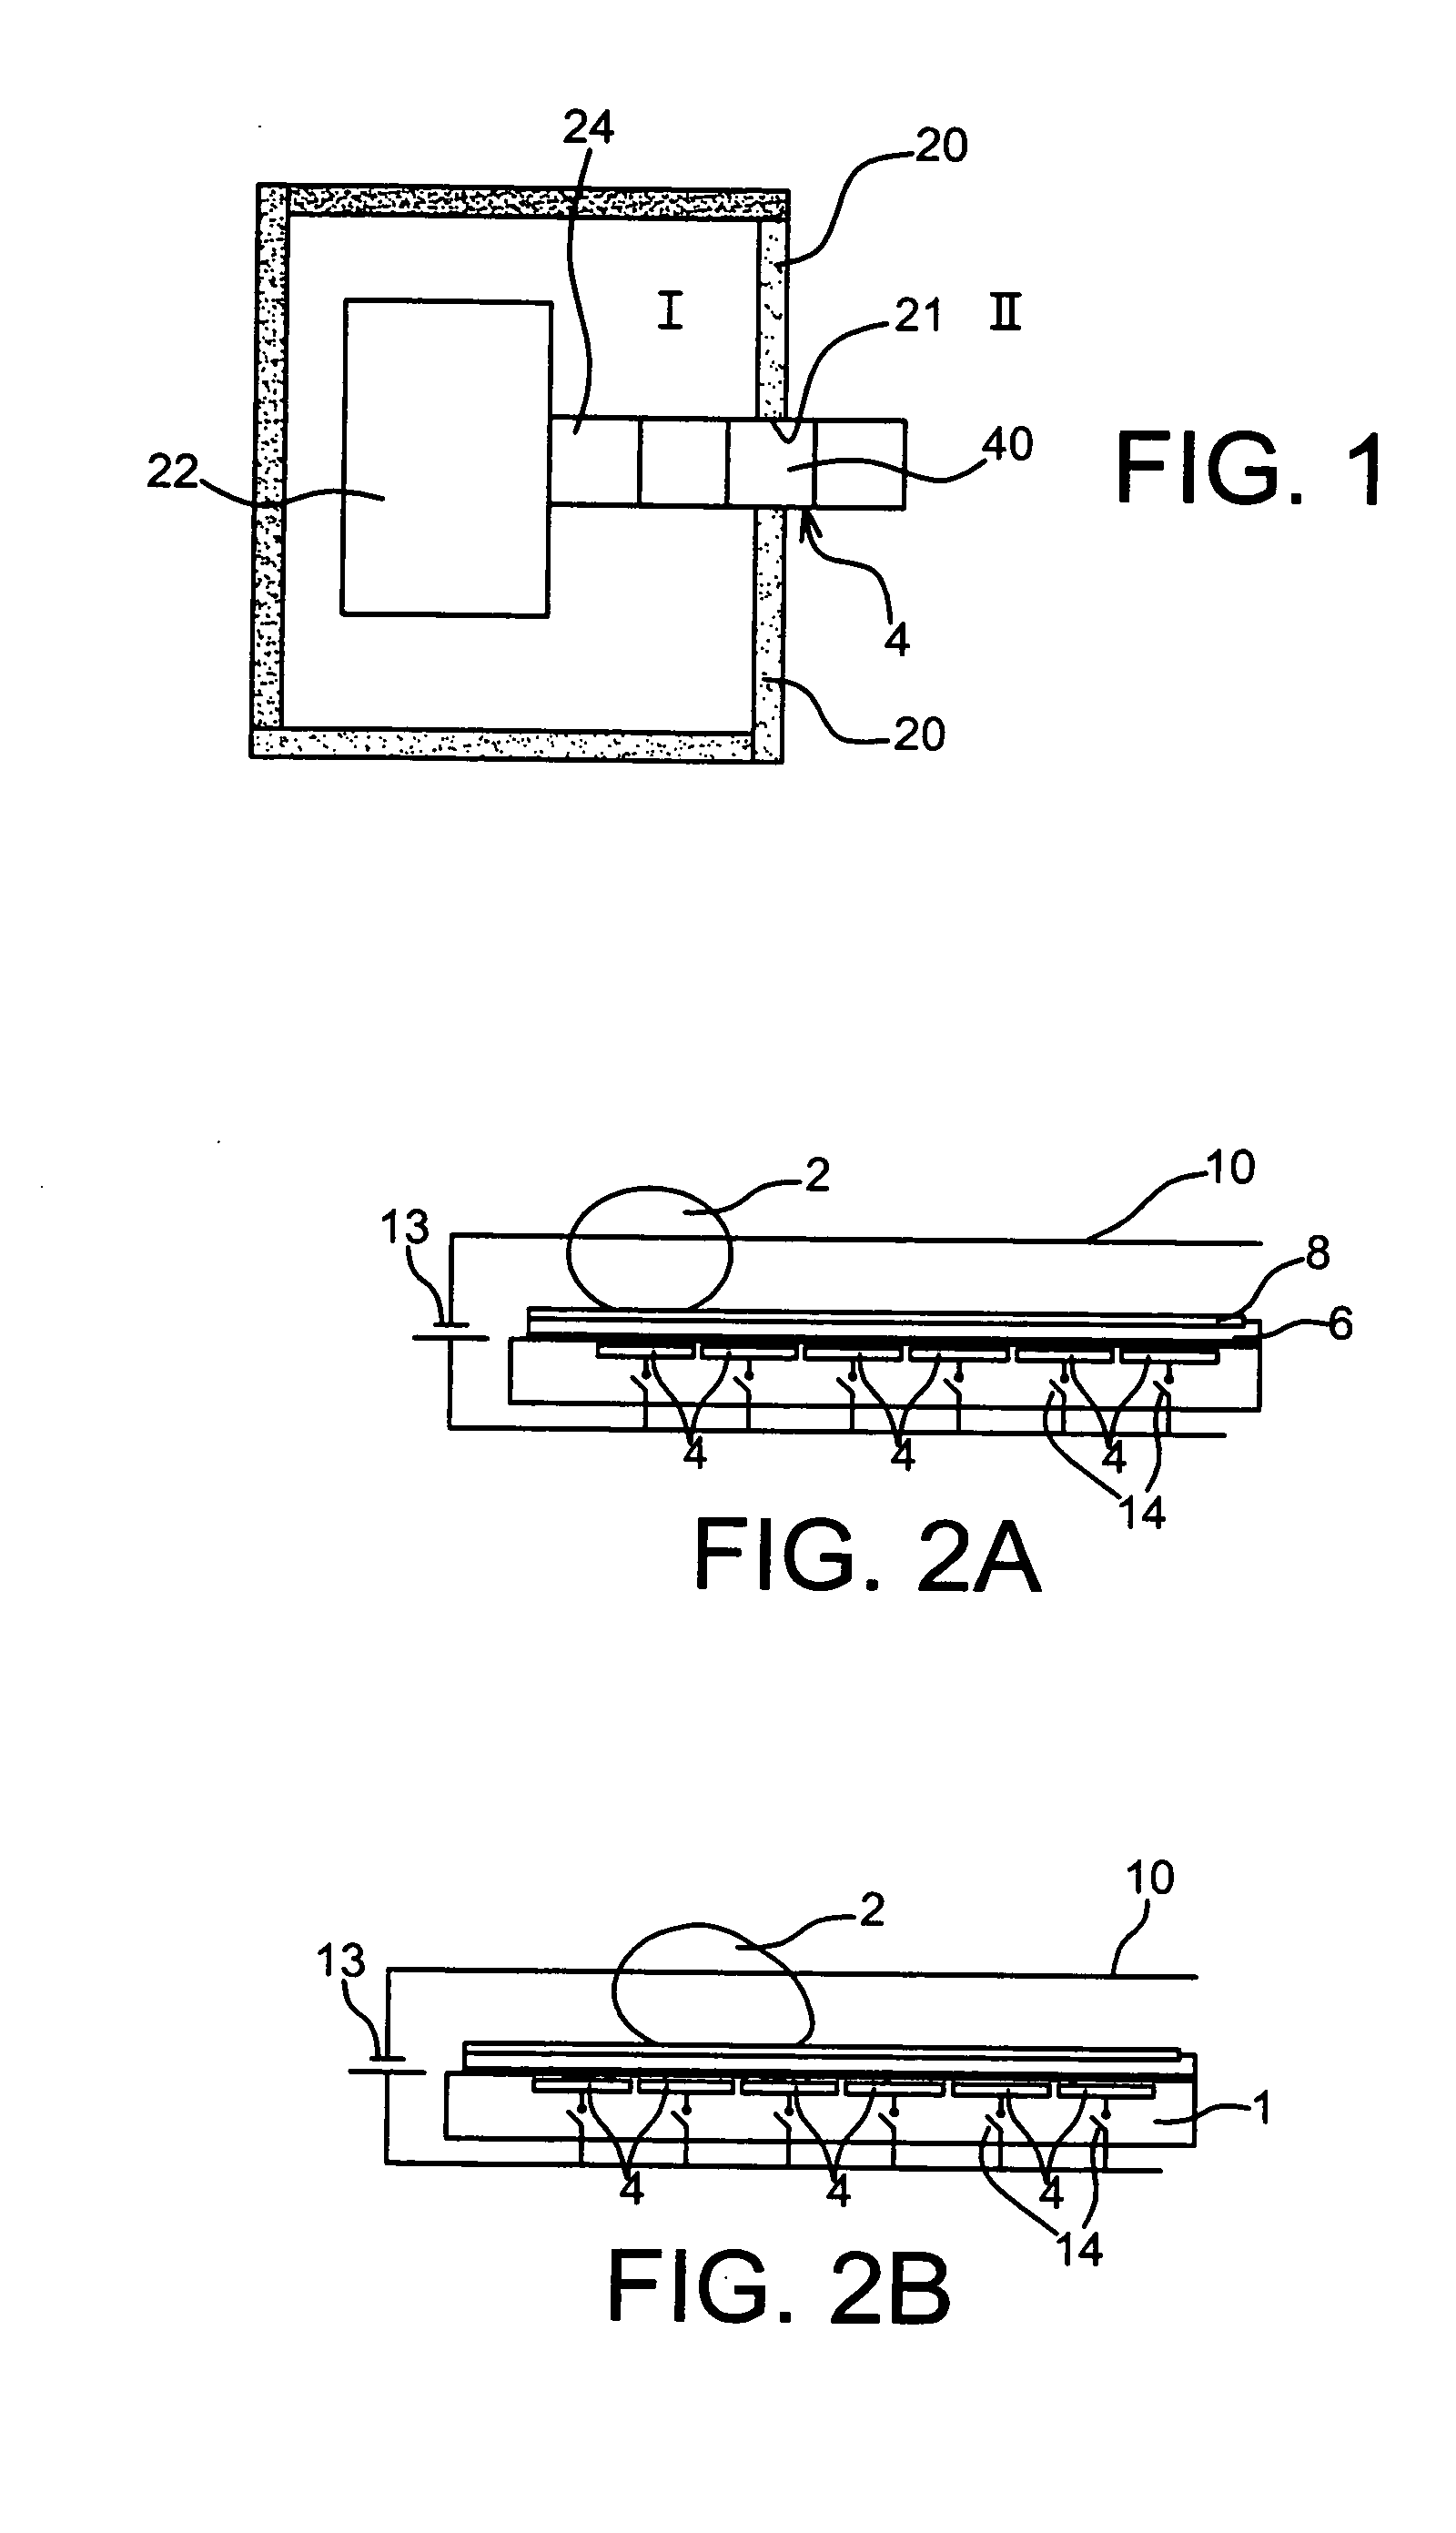 Method for Controlling a Communication Between Two Areas By Electrowetting, a Device Including Areas Isolatable From Each Other and Method for making Such a Device